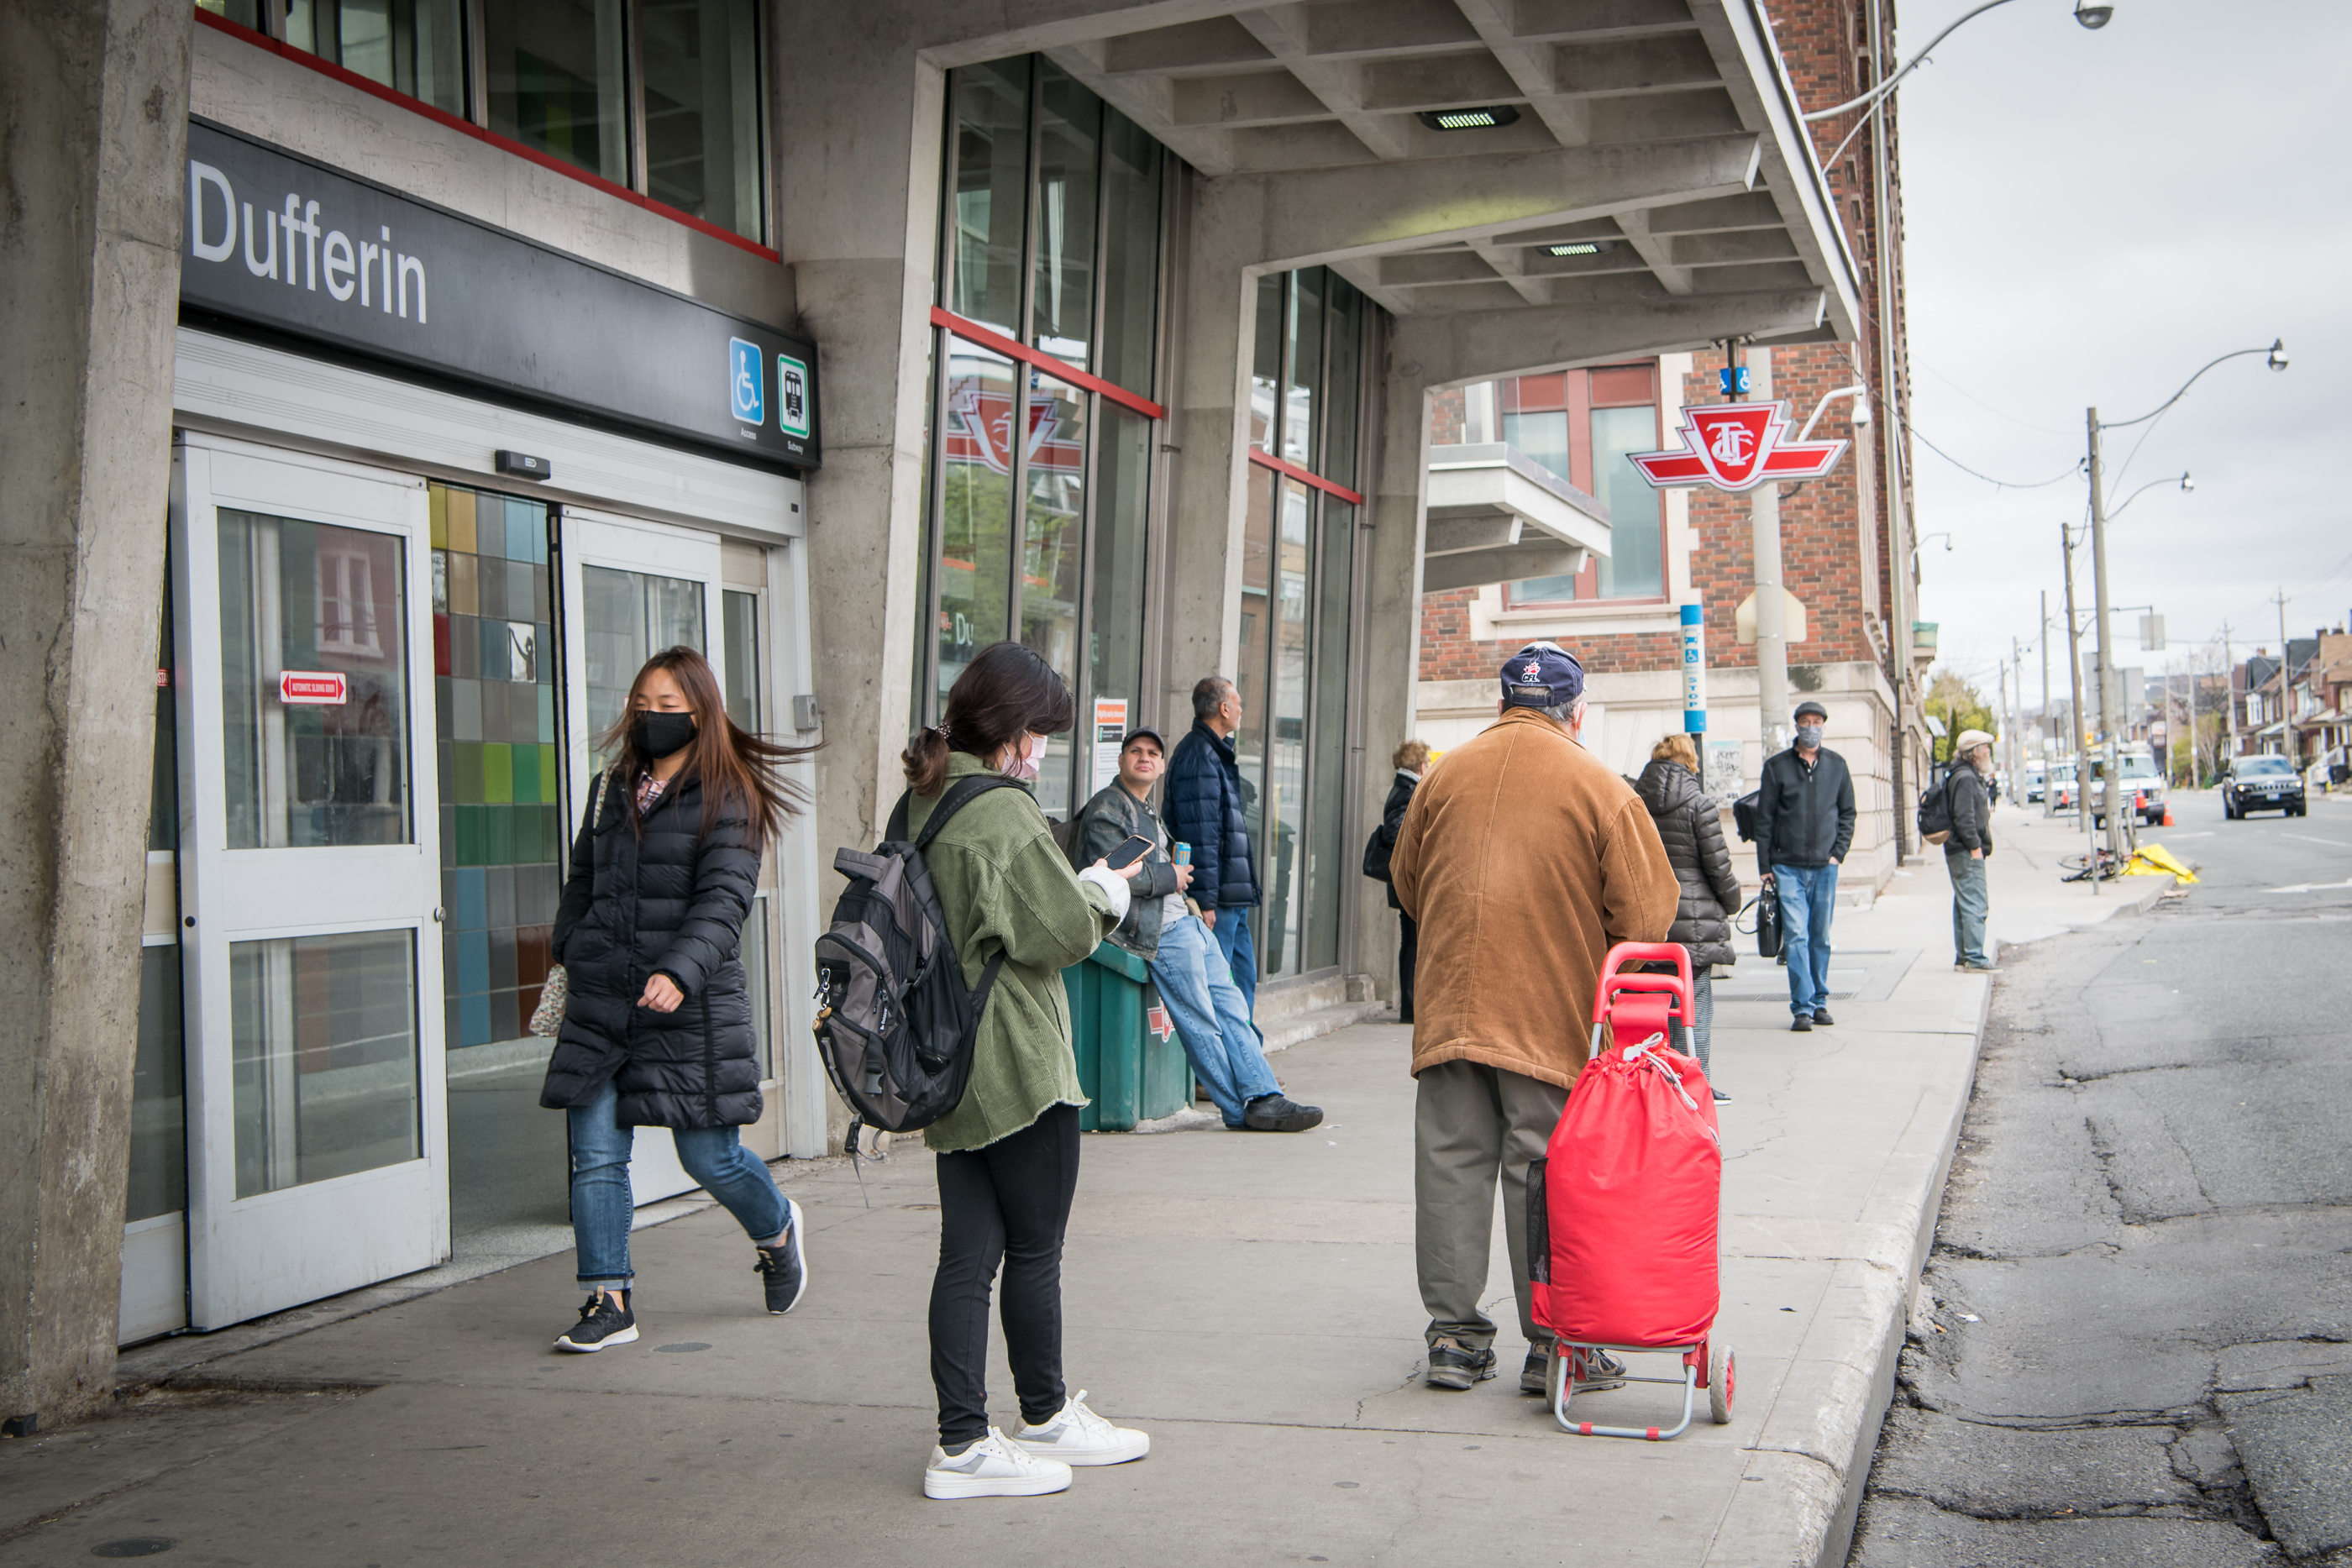 Image of customers waiting for a bus and entering Dufferin station